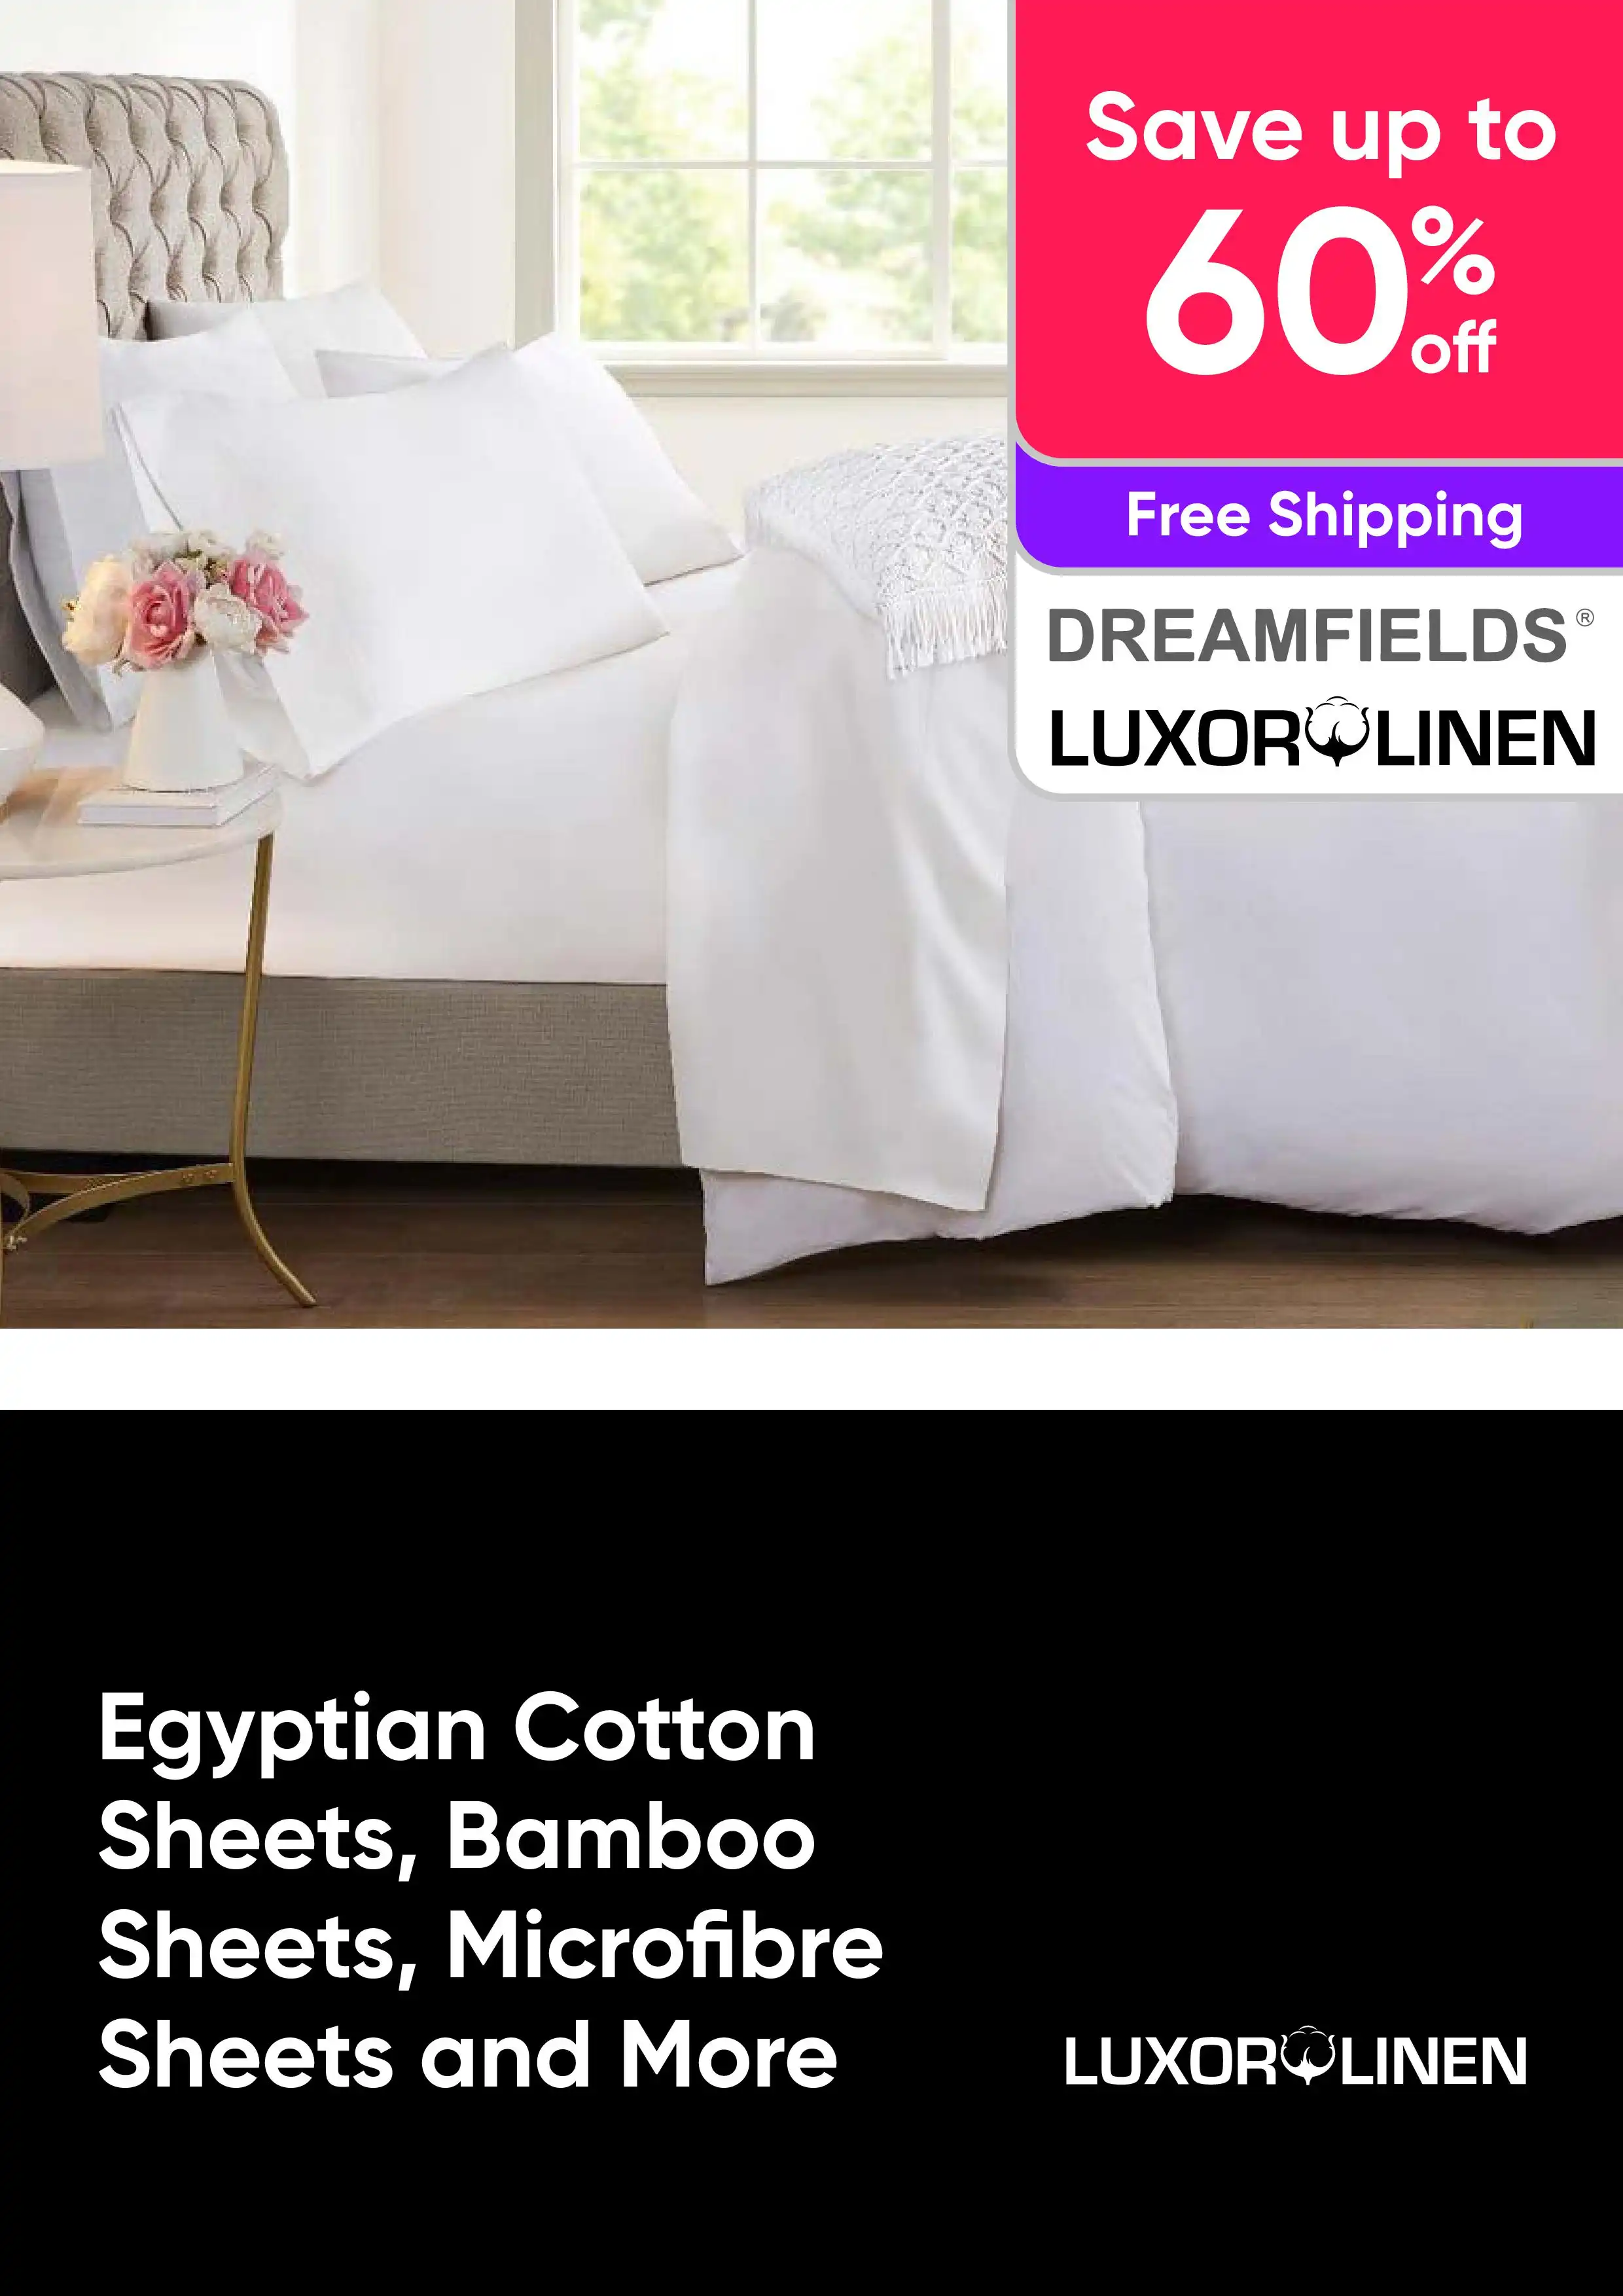 Save Up to 60% Off Egyptian Cotton Sheets, Bamboo Sheets, Microfibre Sheets